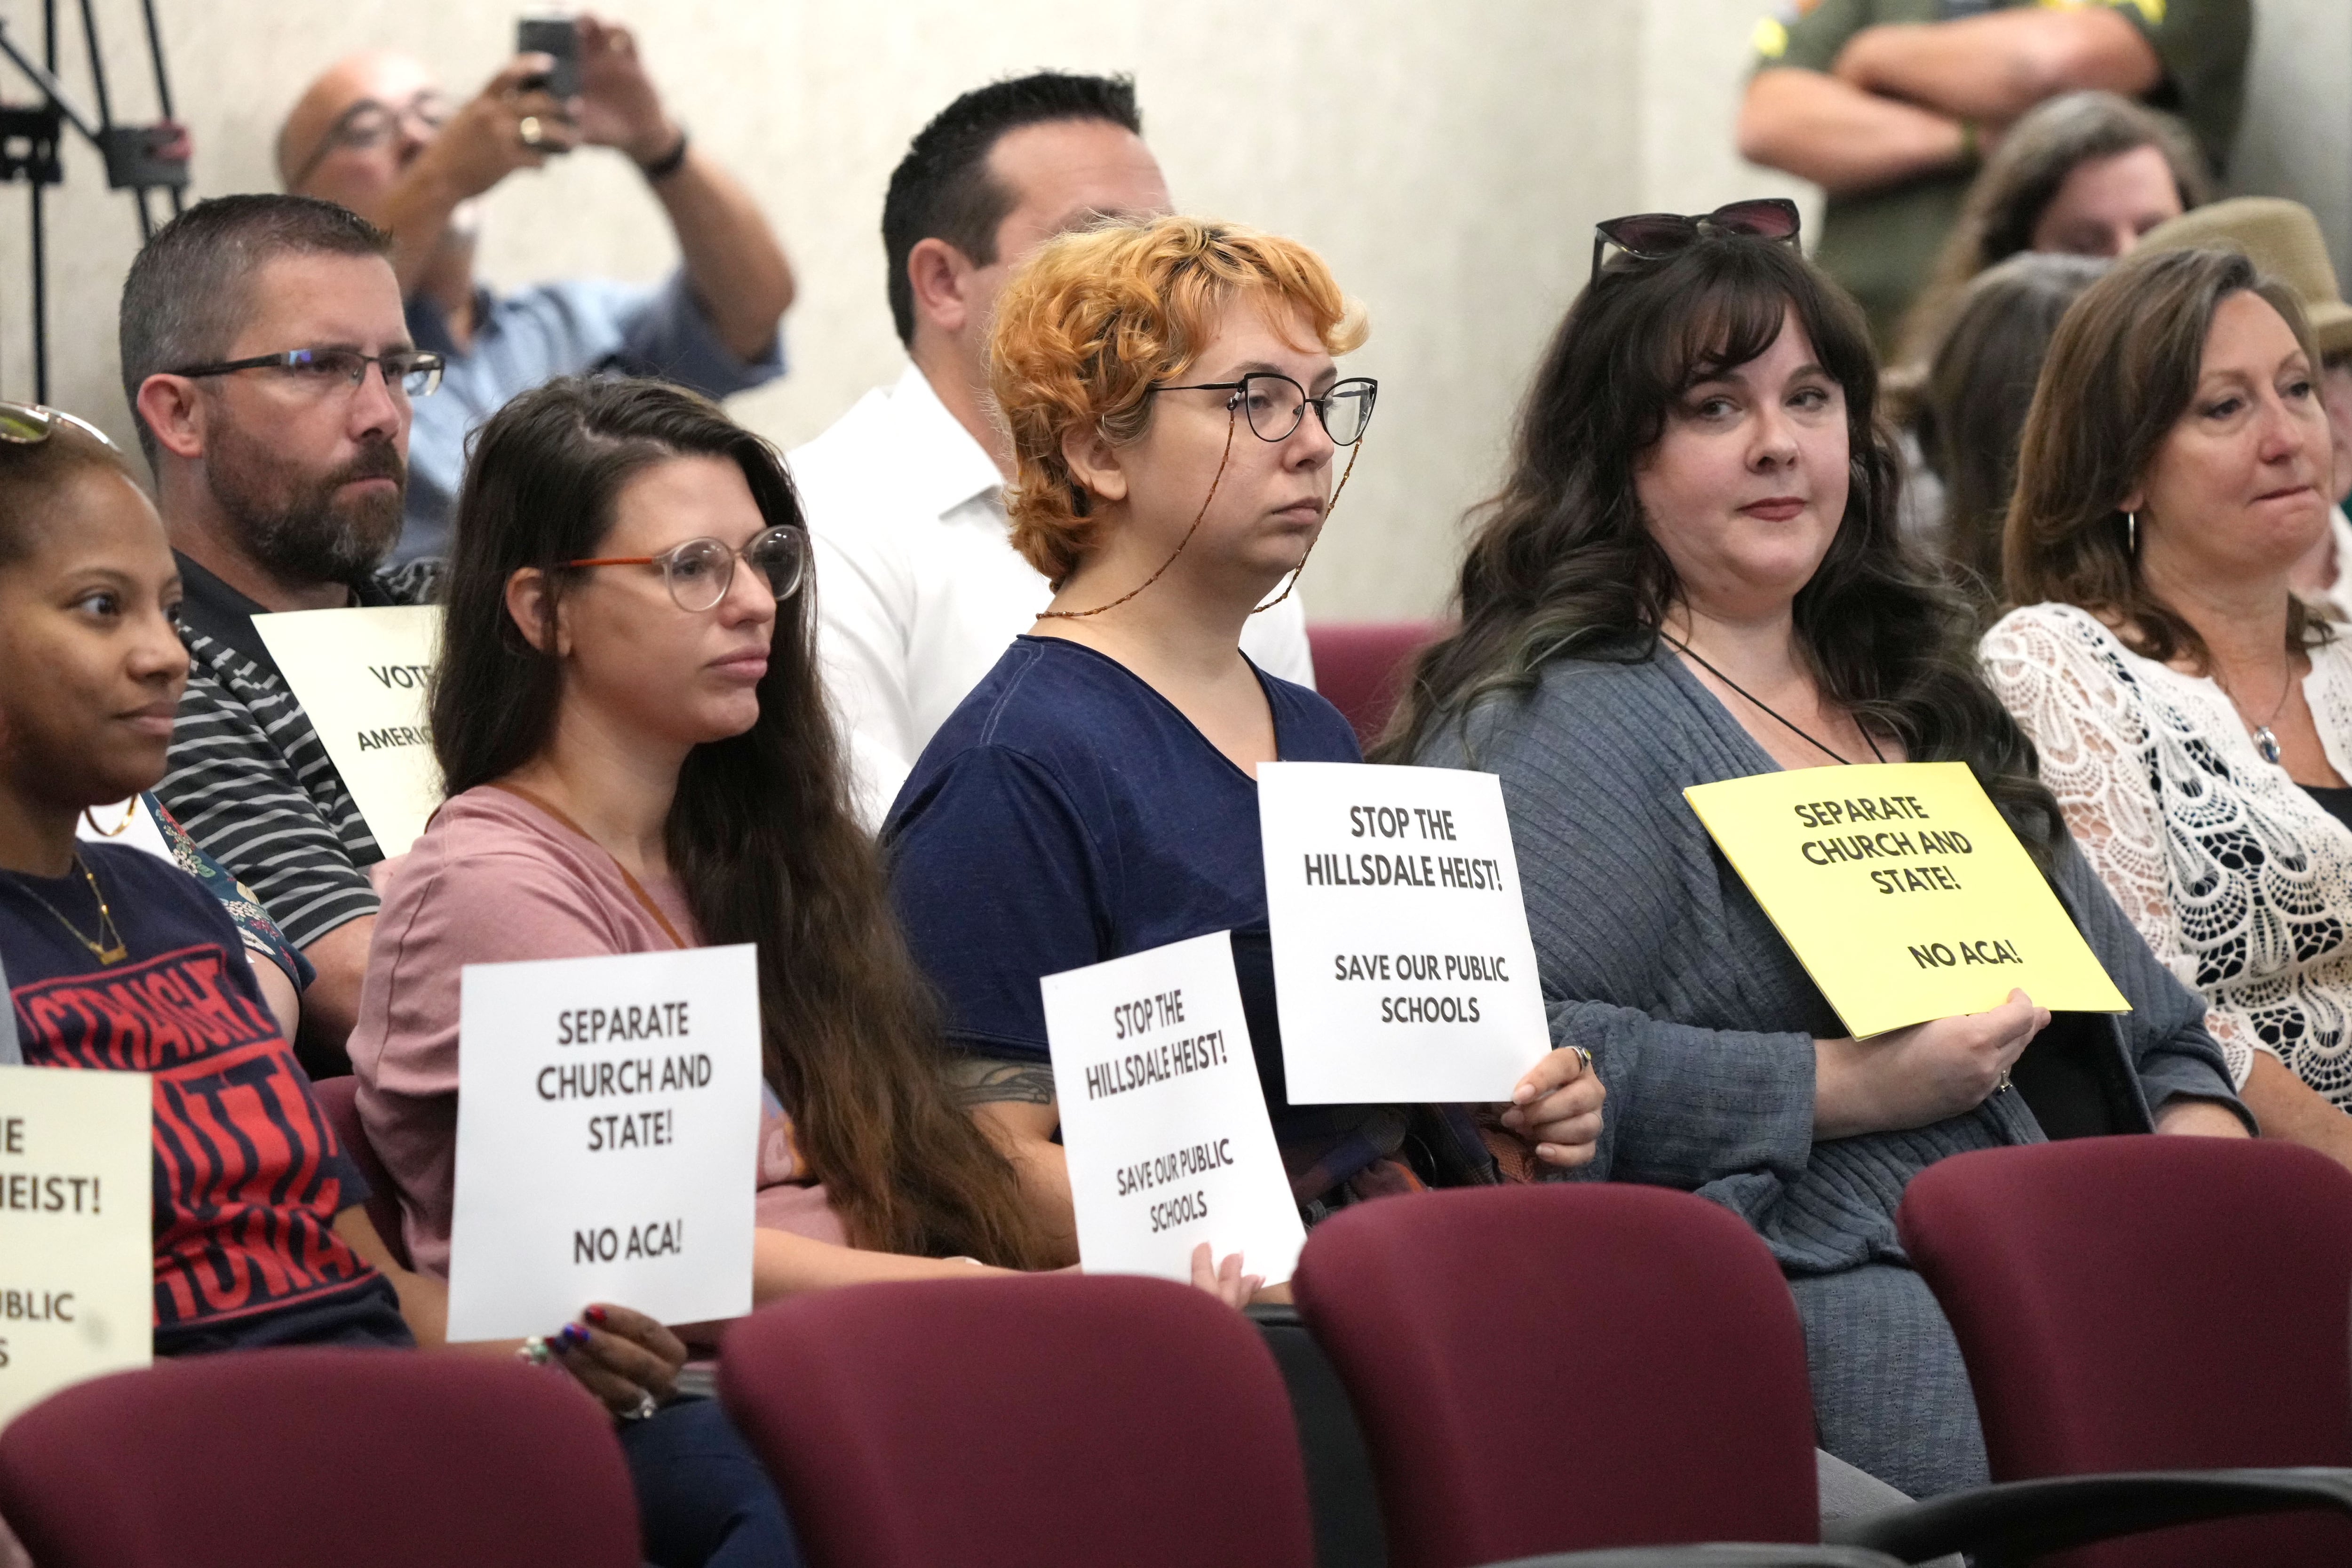 Five women seated during a meeting hold signs opposing Hillsdale College.